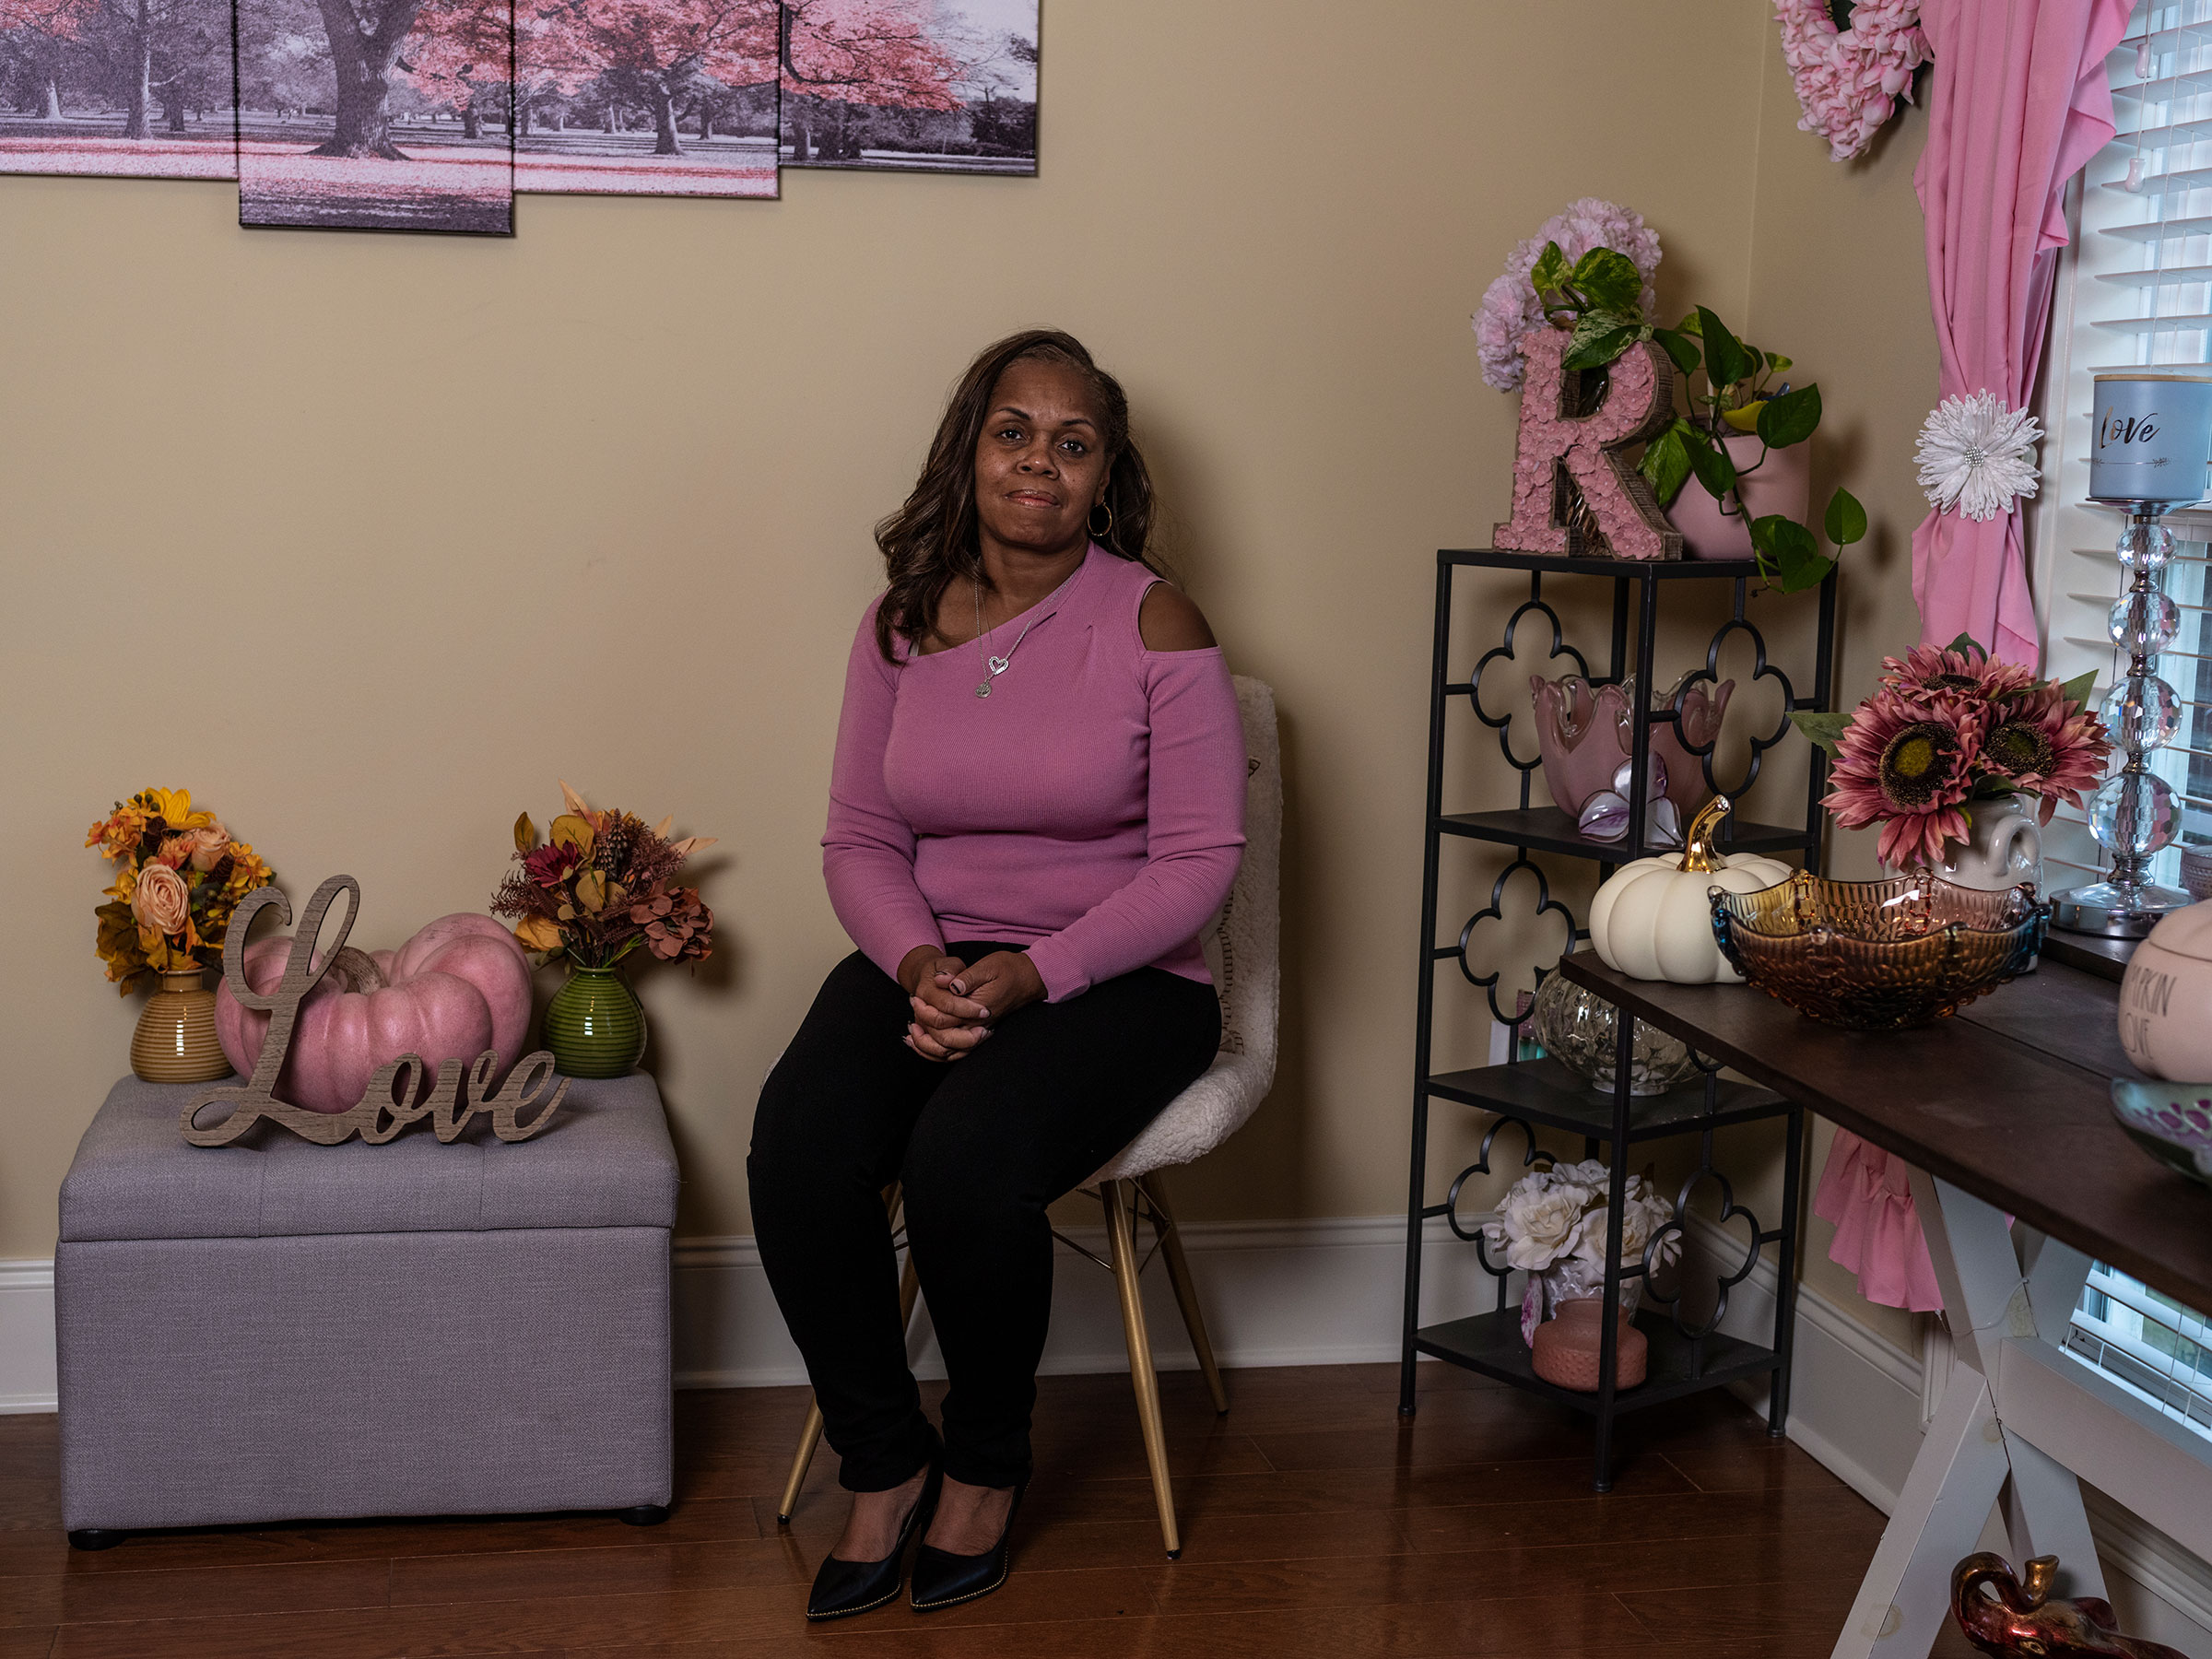 Robin Hassan poses for a portrait at her home in Atlanta on November 6.  (Jillian Laub for TIME)